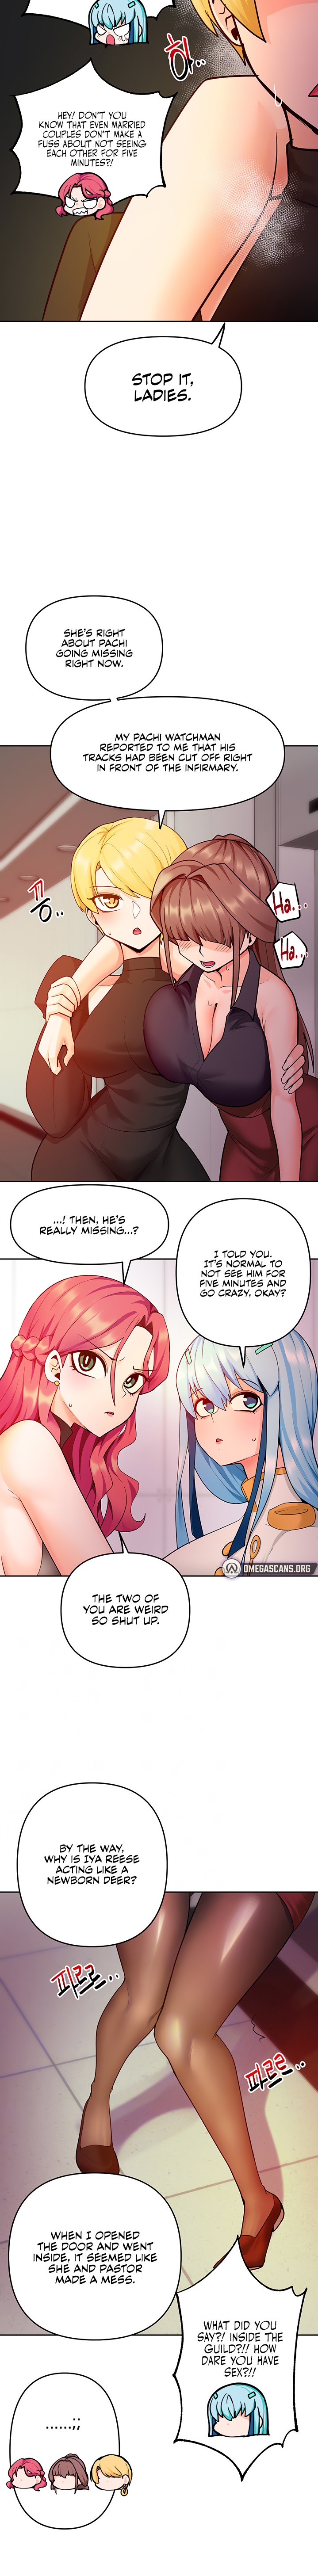 The Hypnosis App was Fake - Chapter 49 Page 6